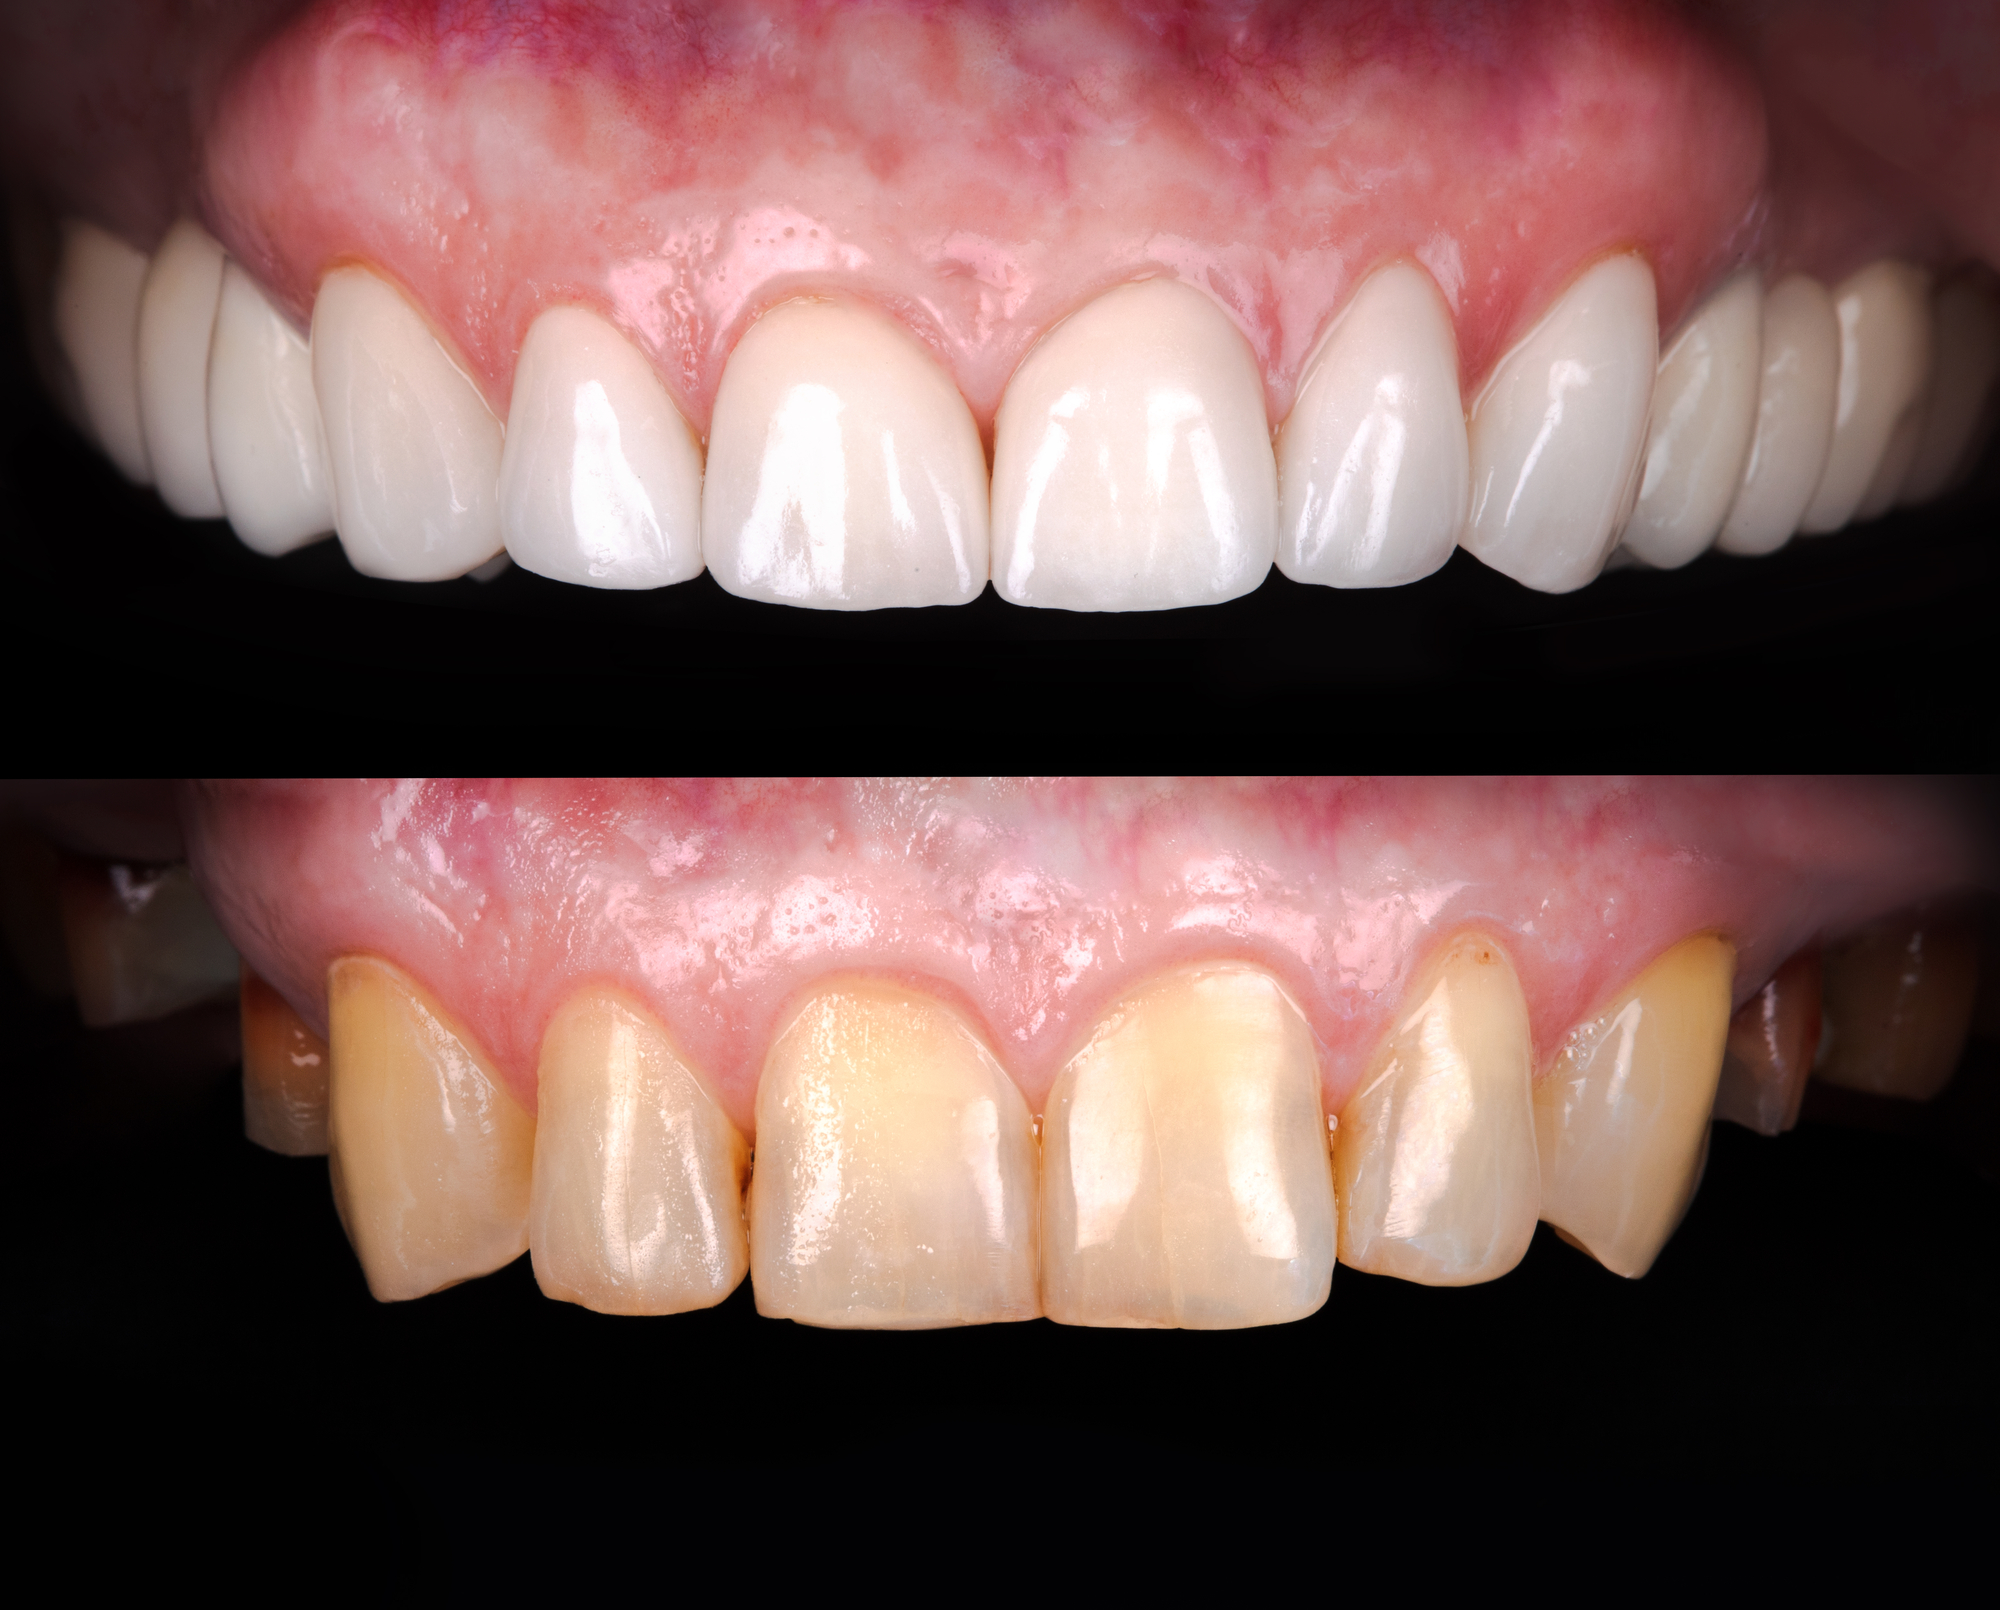 Comparison of two sets of teeth, top showing clean white teeth, bottom displaying stains on teeth.